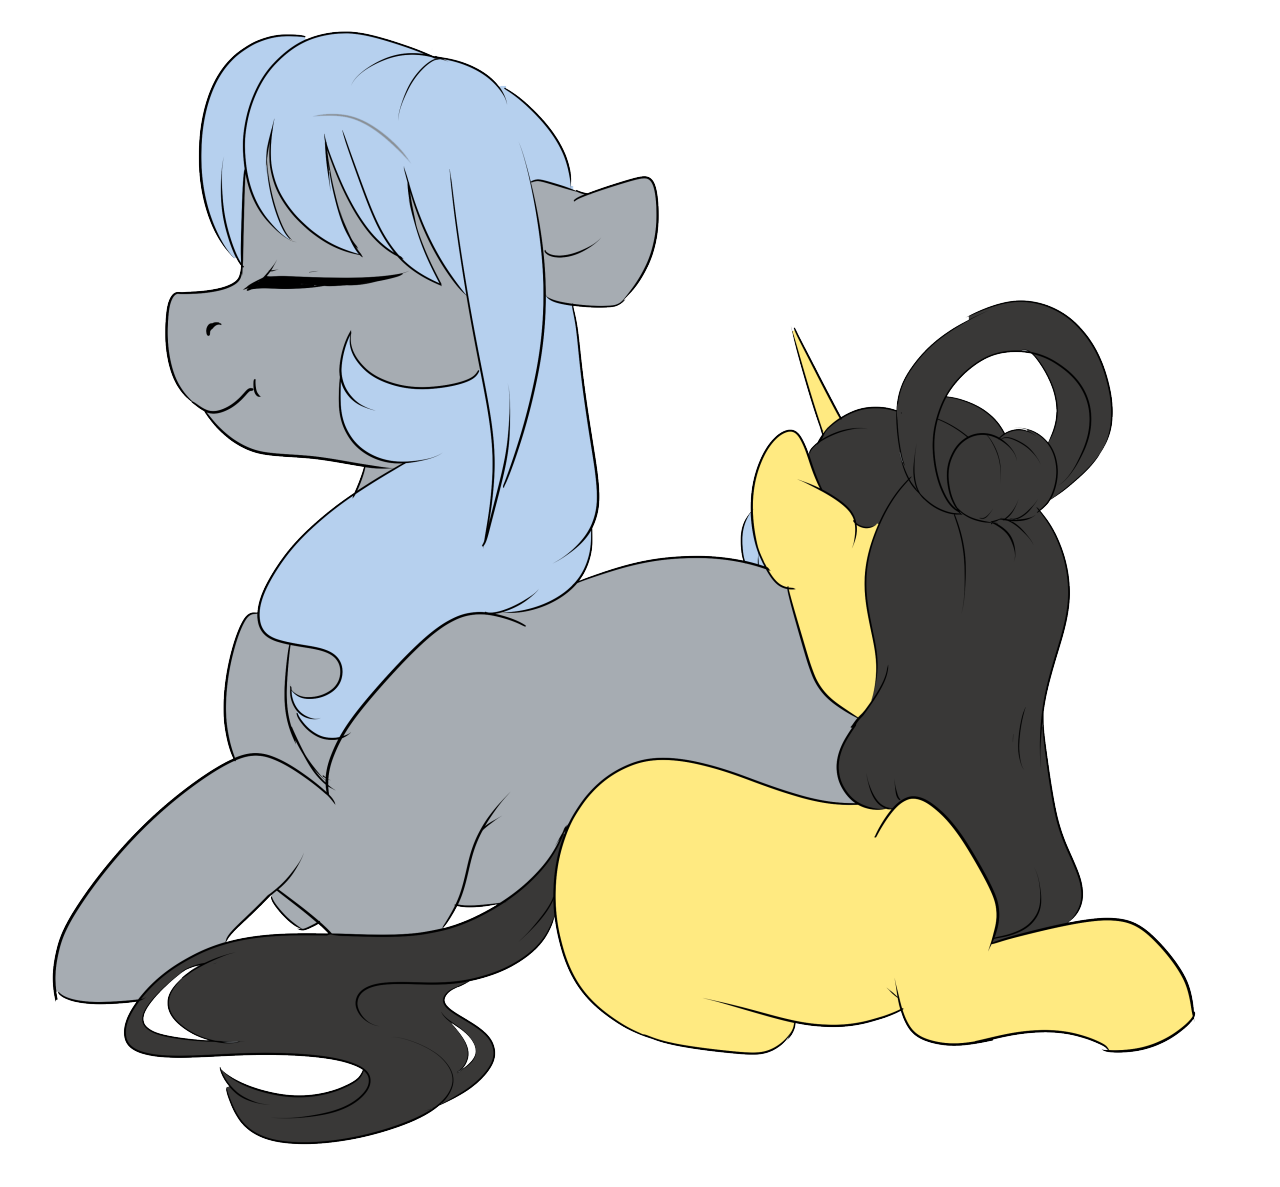 bubblepopmod:shinyshaini  replied to your photo “-neighs softly-”-neighs at you